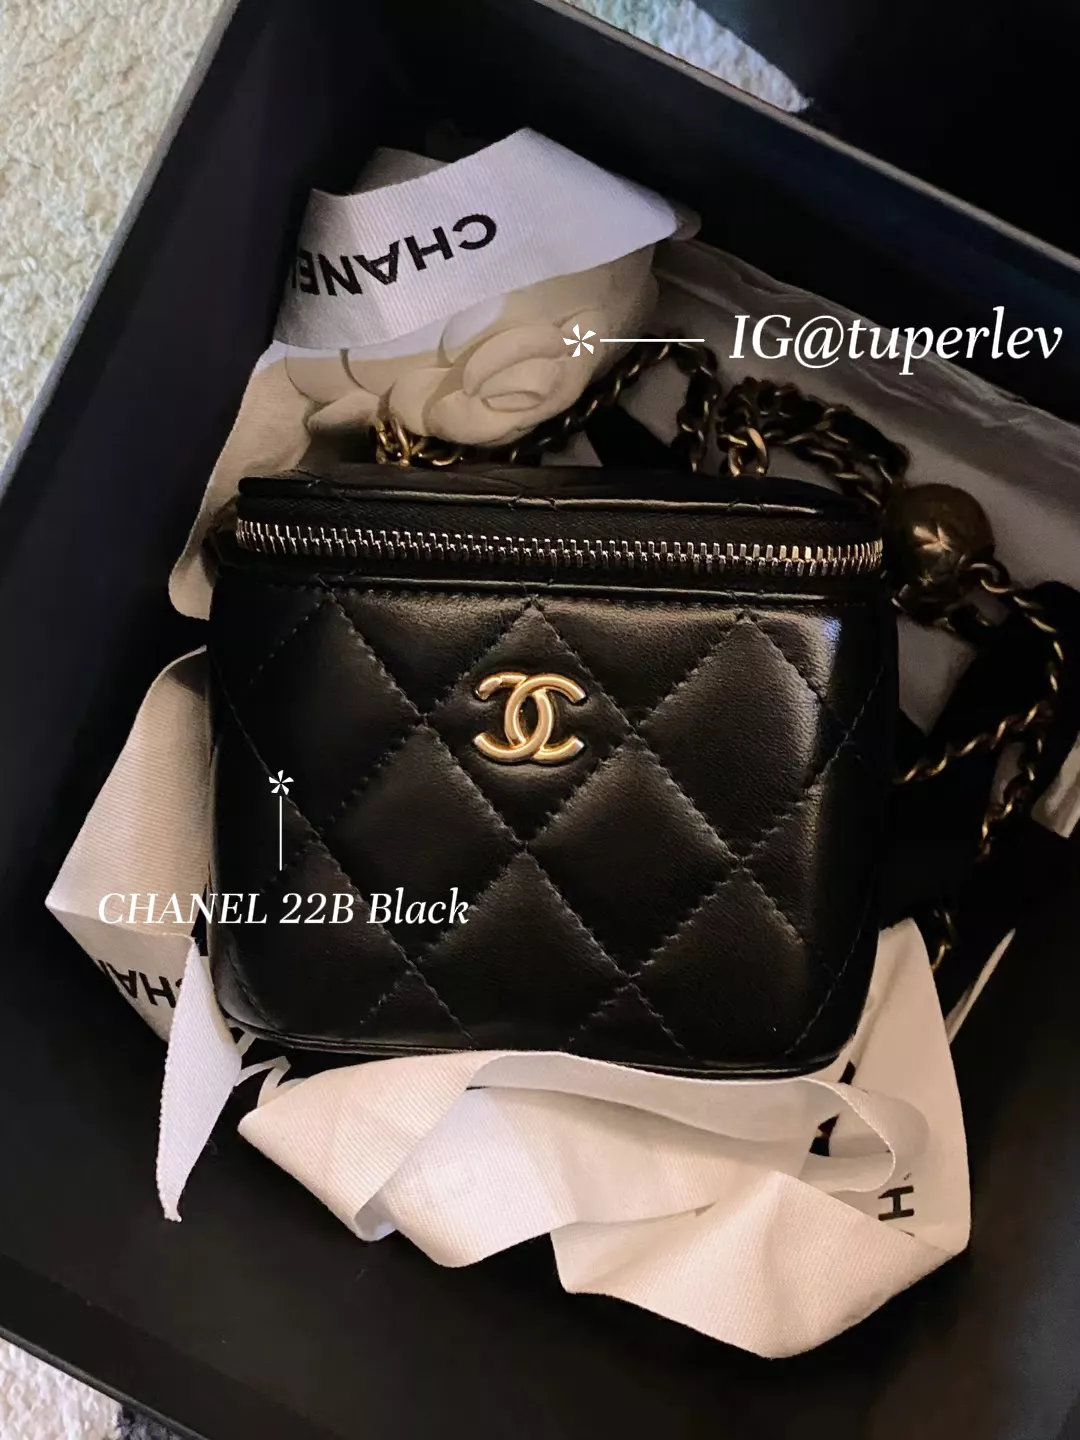 REVIEW NEW CHANEL BAG, Gallery posted by Kambhu